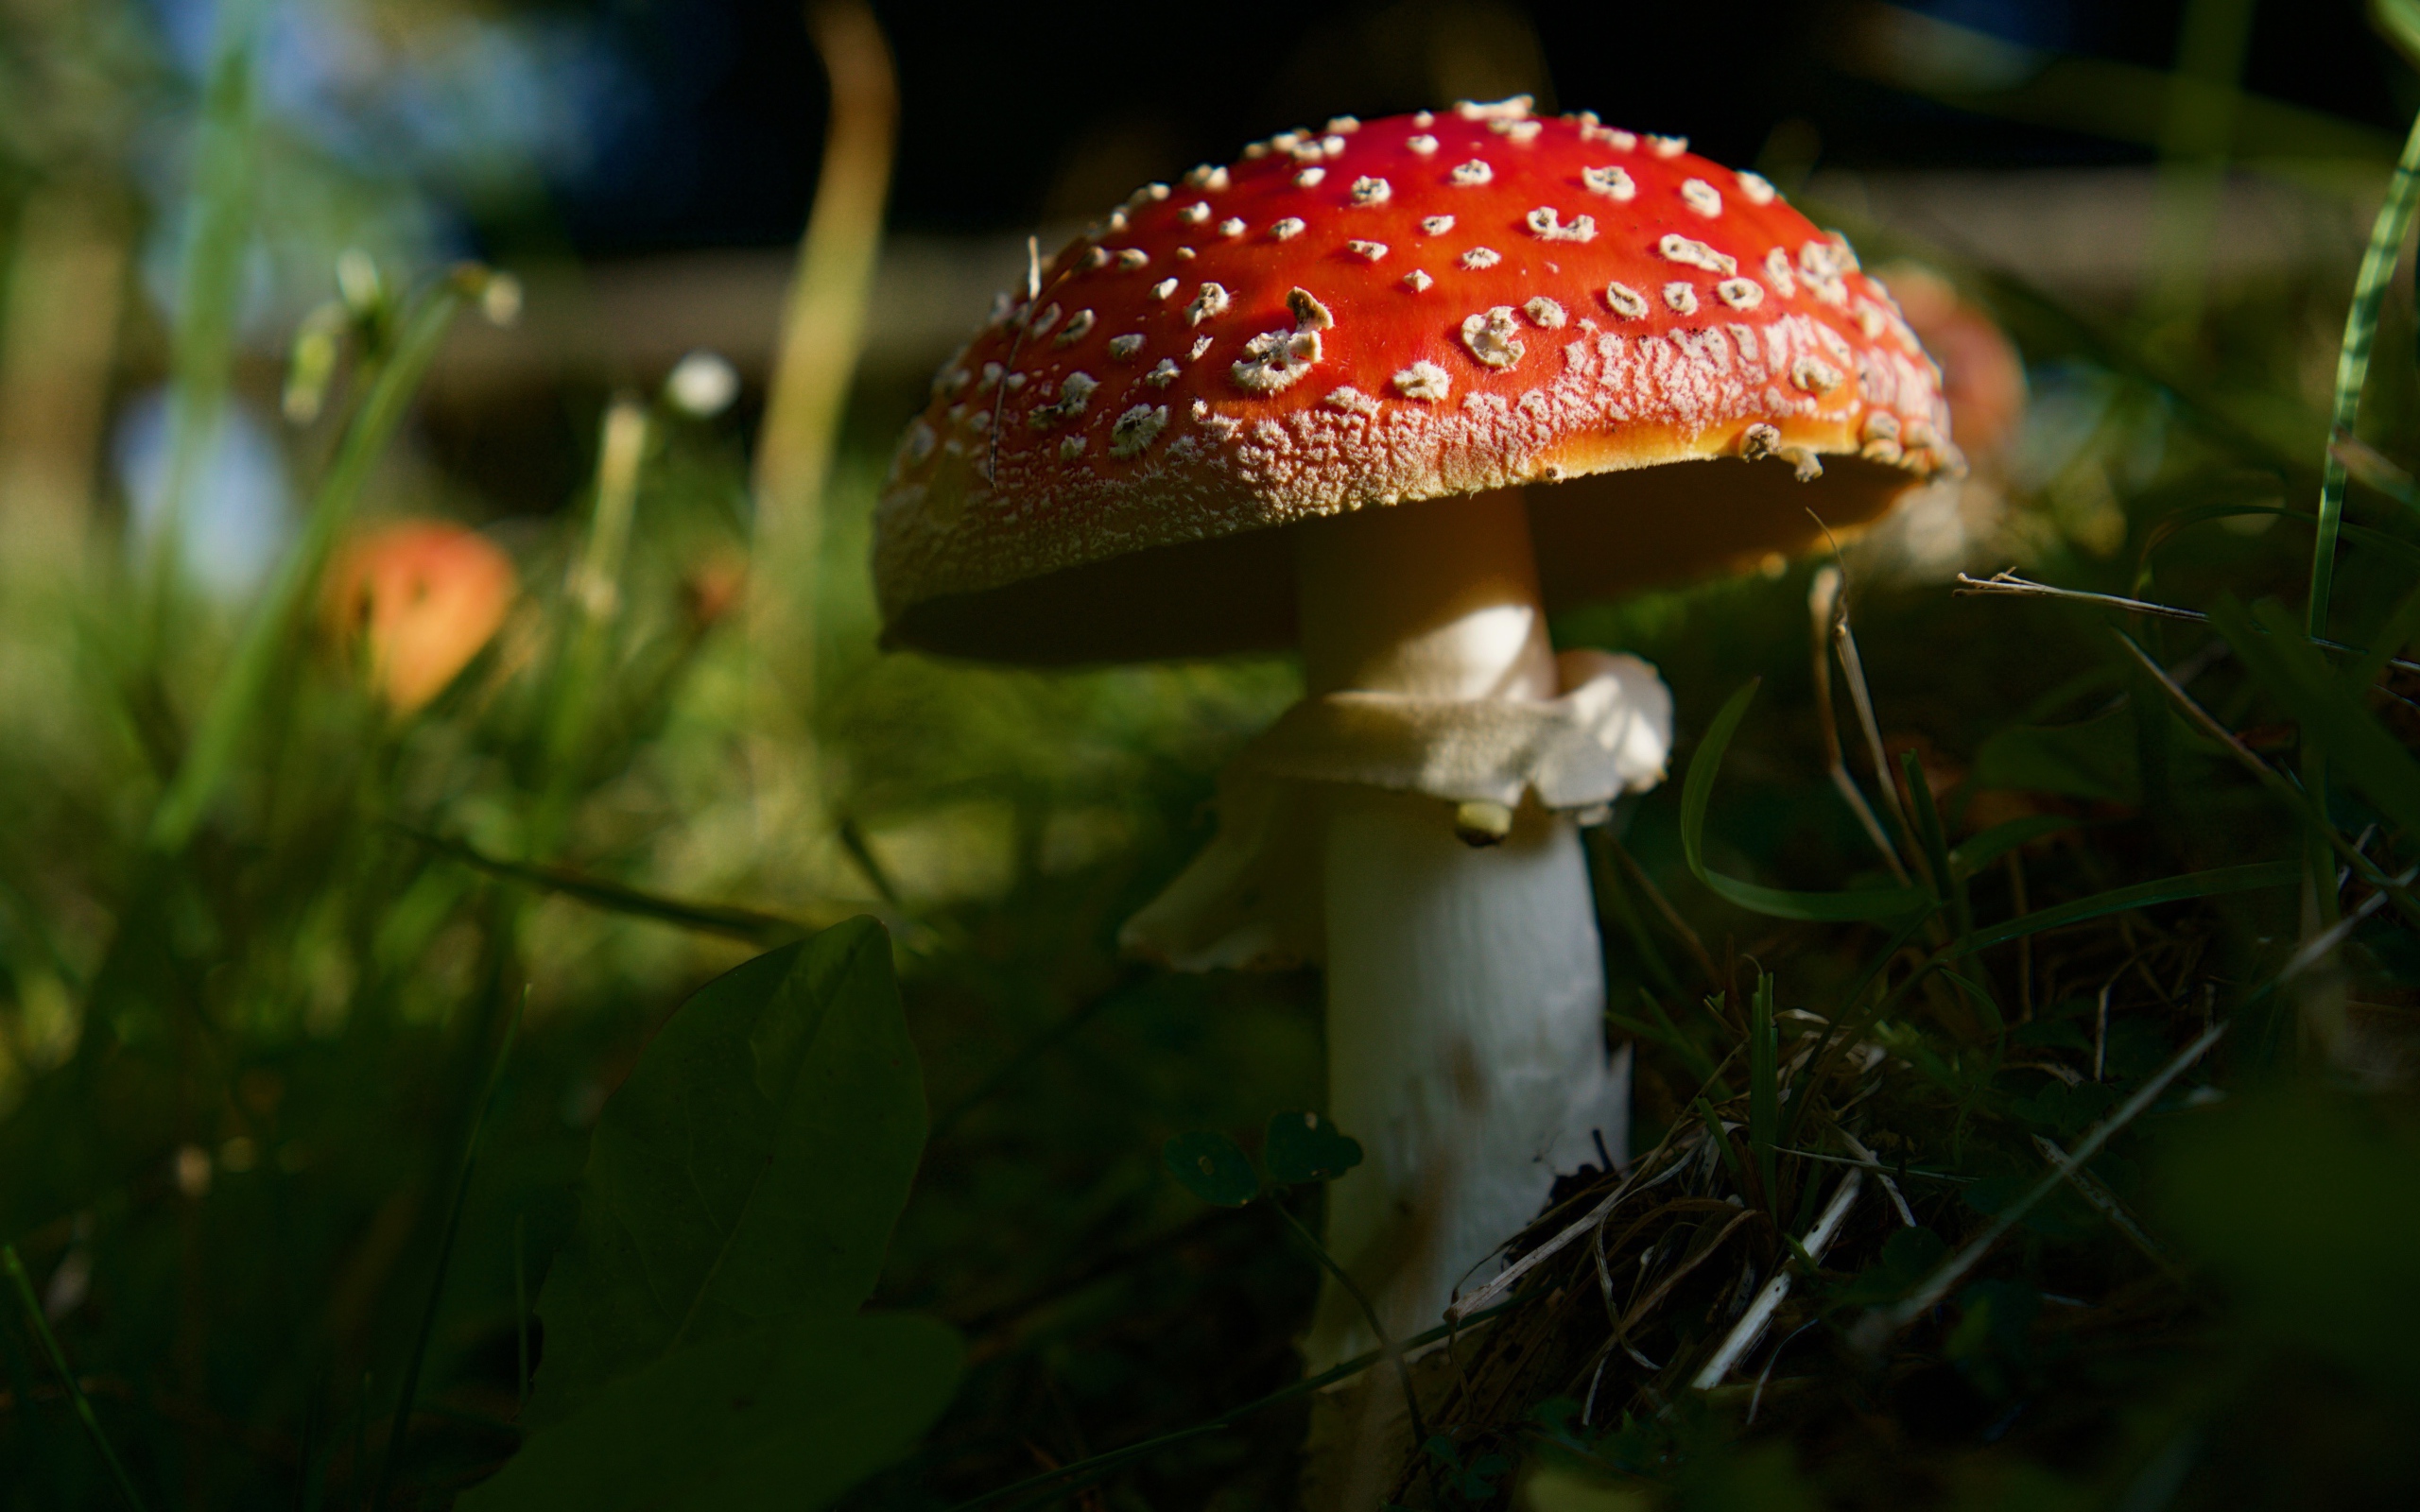 Red forest fly agaric in green grass